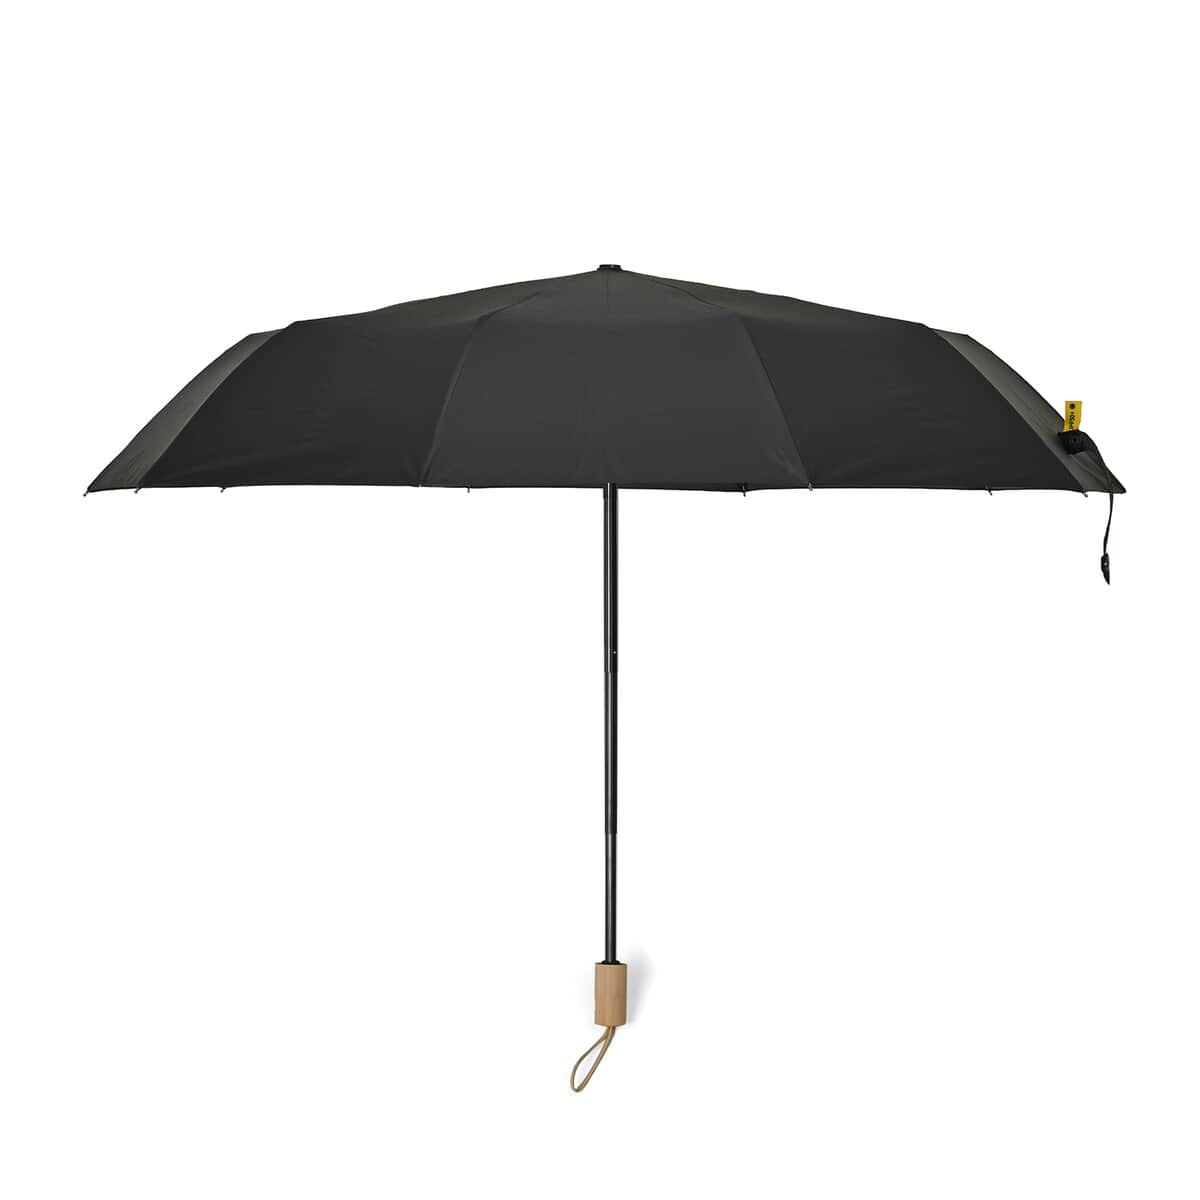 Black Folding Sun Umbrella with 10 Ribs (Inside Black Coating Can Provide UPF 50+ Protection) image number 2